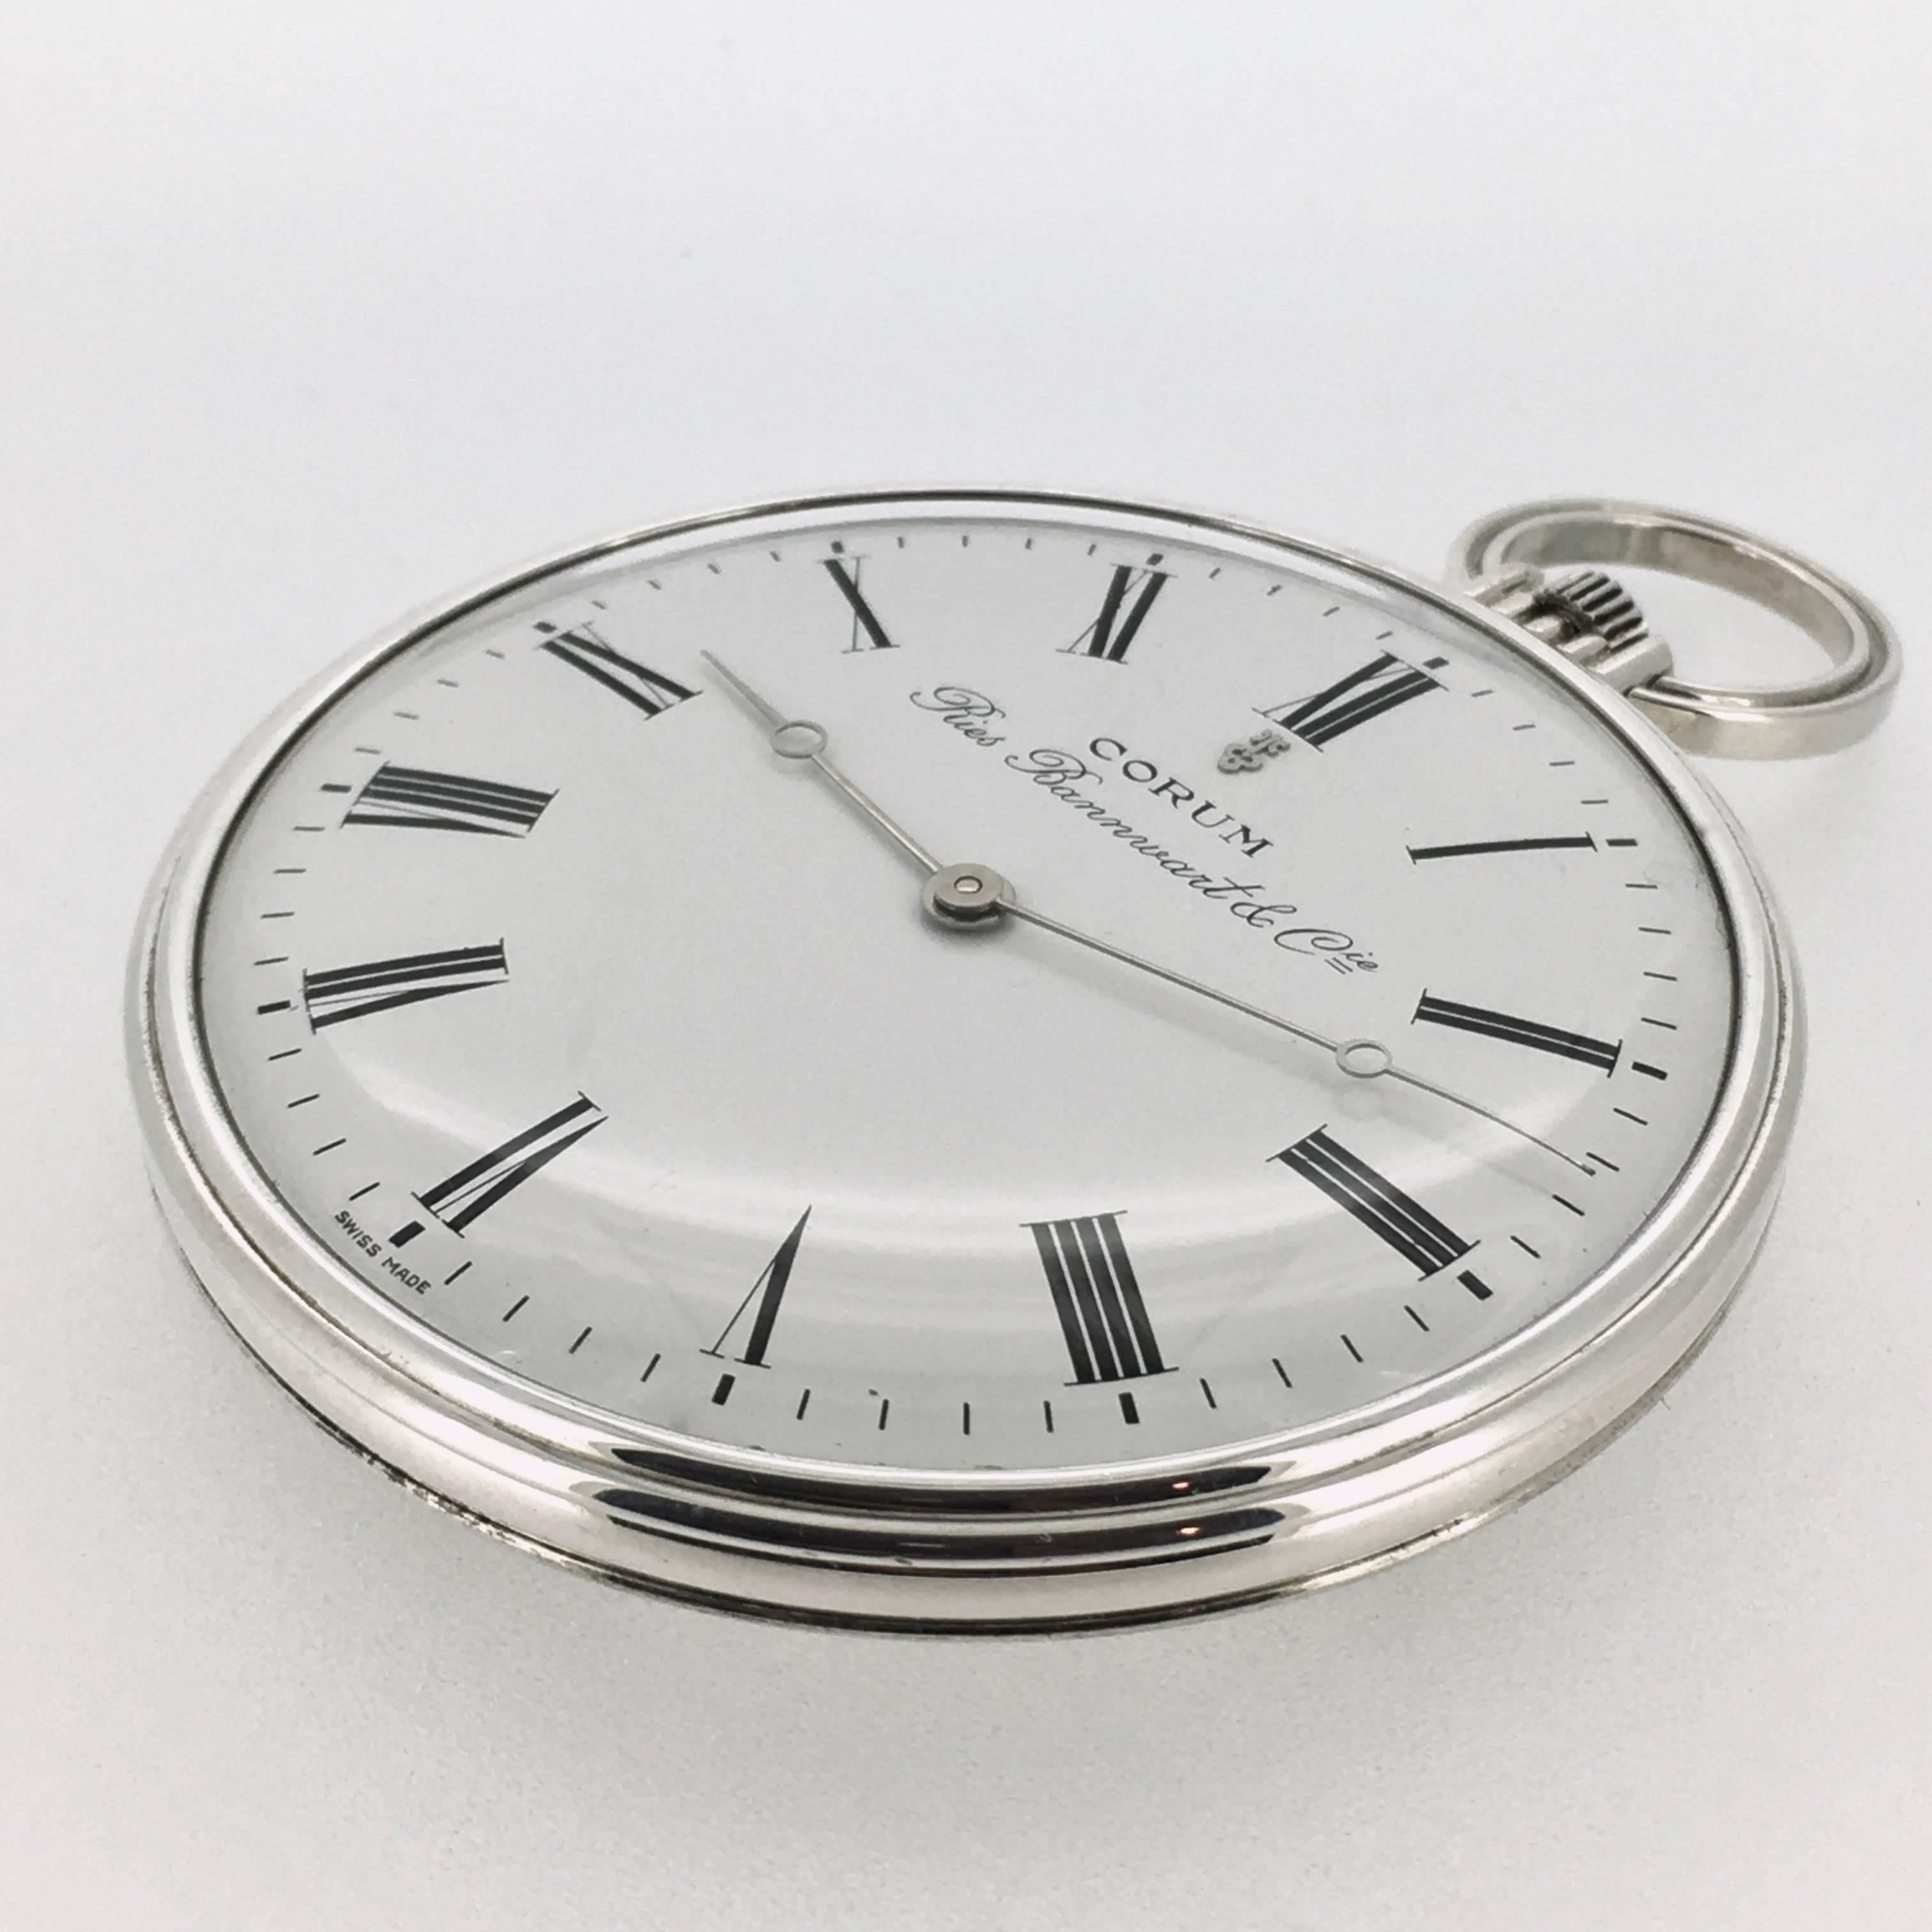 Sterling silver Corum pocket watch, Ries Bannnwart & Cie. edition. This very seldom Corum classic pocket watch is in excellent condition. Besides the high standard movement, our watchmaker was highly charmed by the minute and hour hand being so